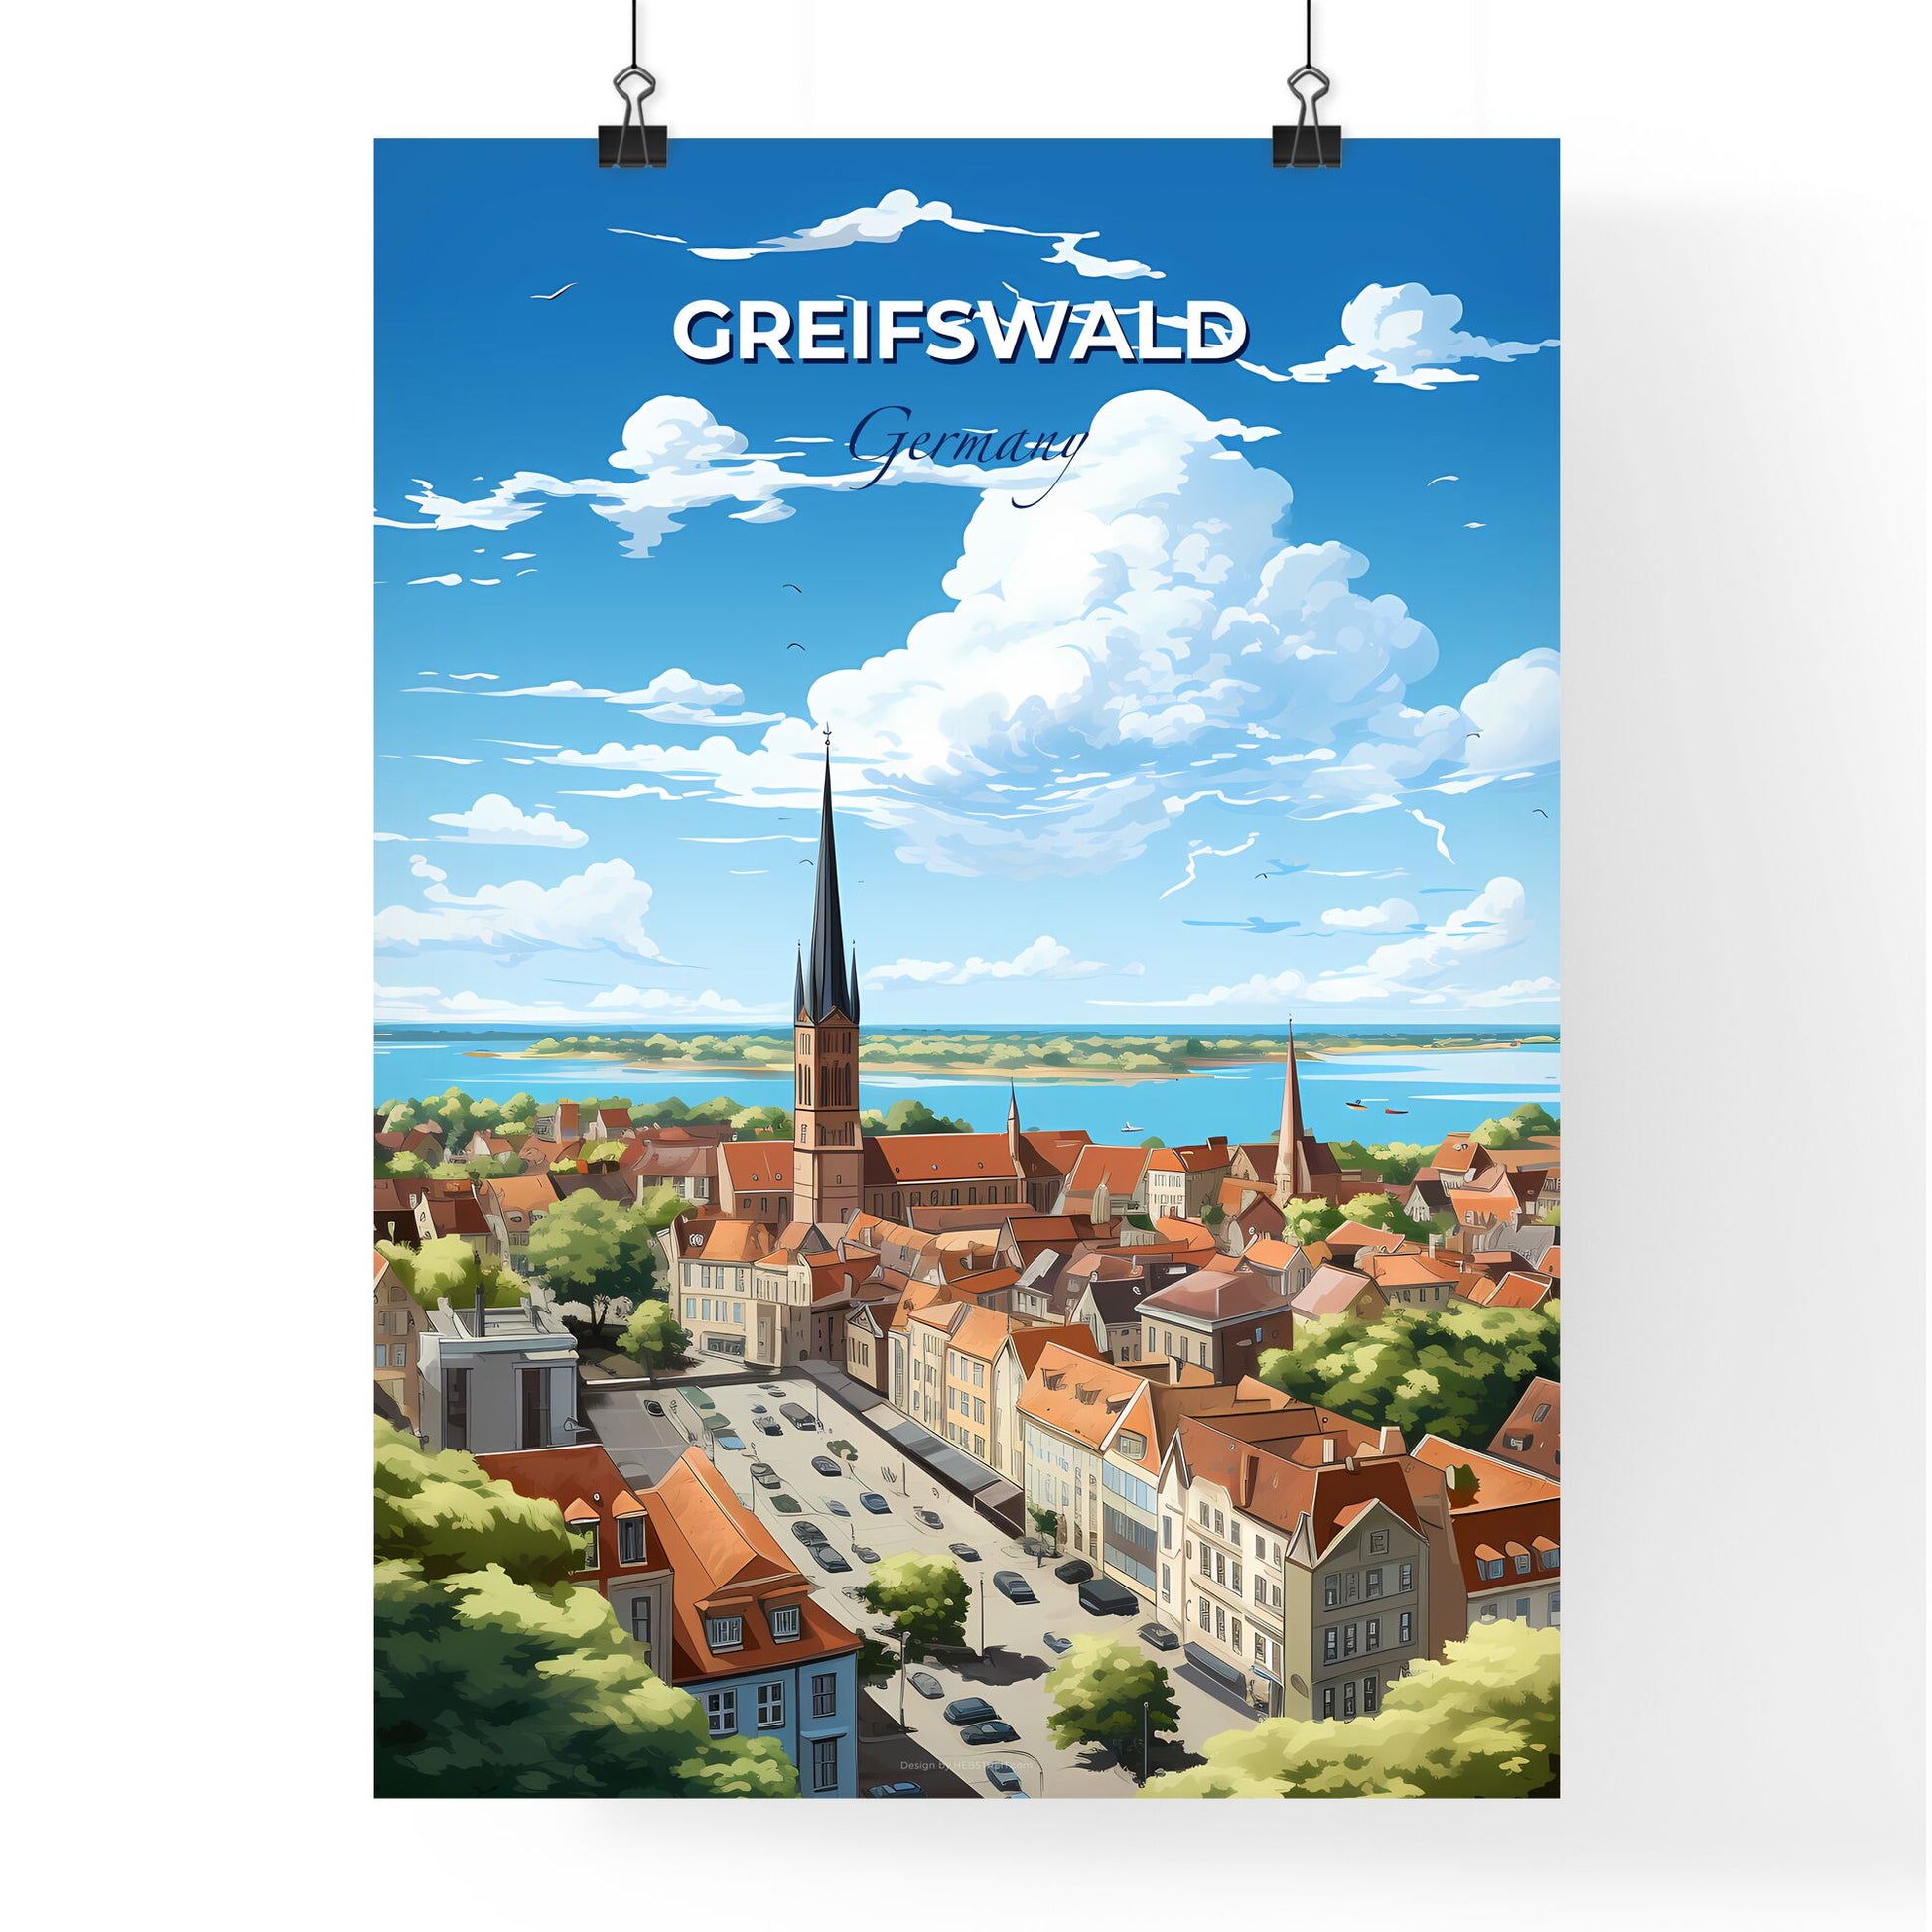 Greifswald Germany Sklyine - A City With A Tower And A Body Of Water - Customizable Travel Gift Default Title